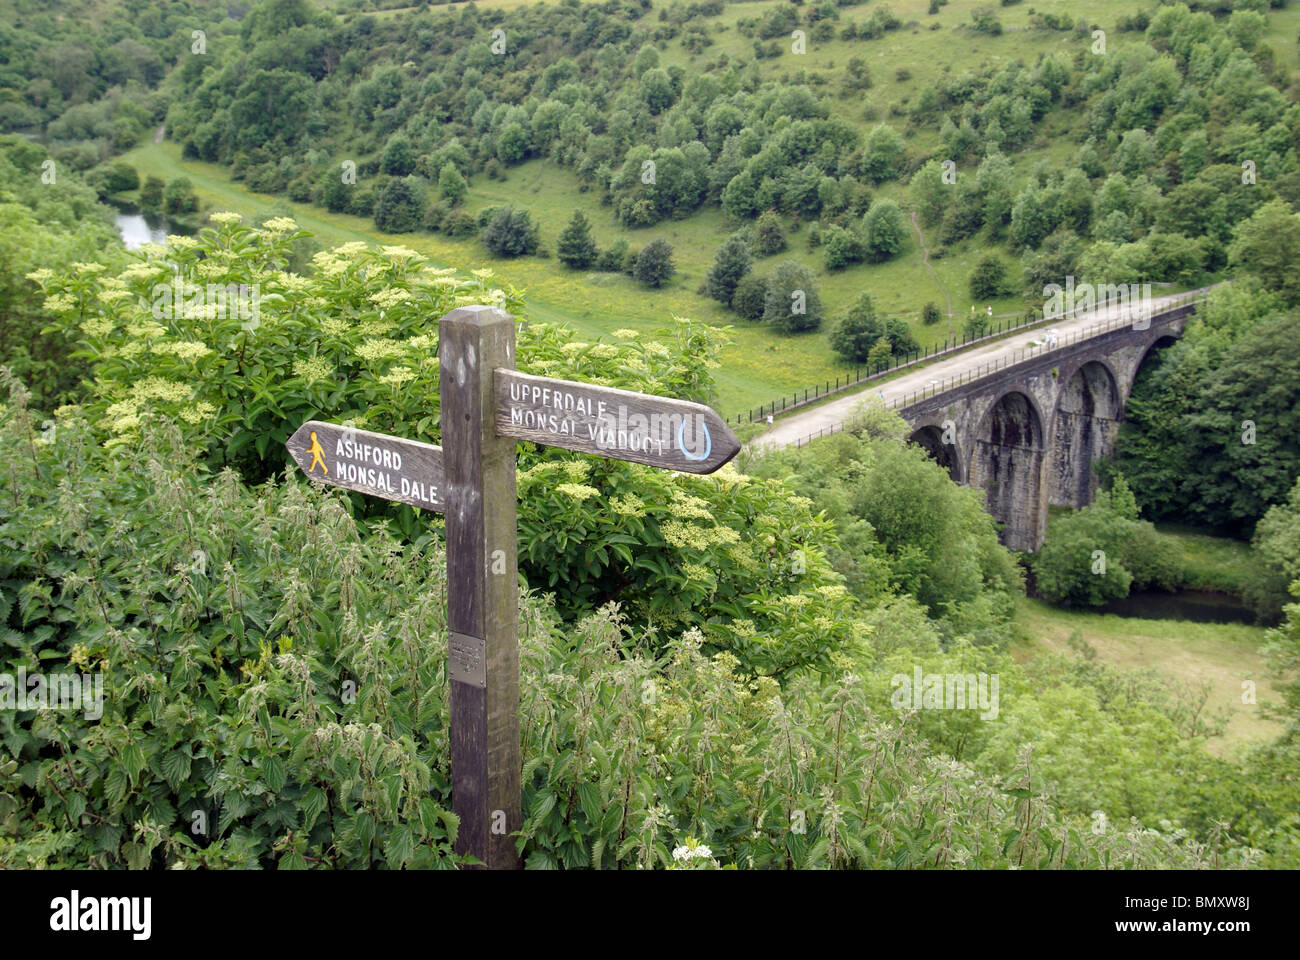 View from the foot path on the Monsal trail over looking Monsal Head Viaduct Stock Photo